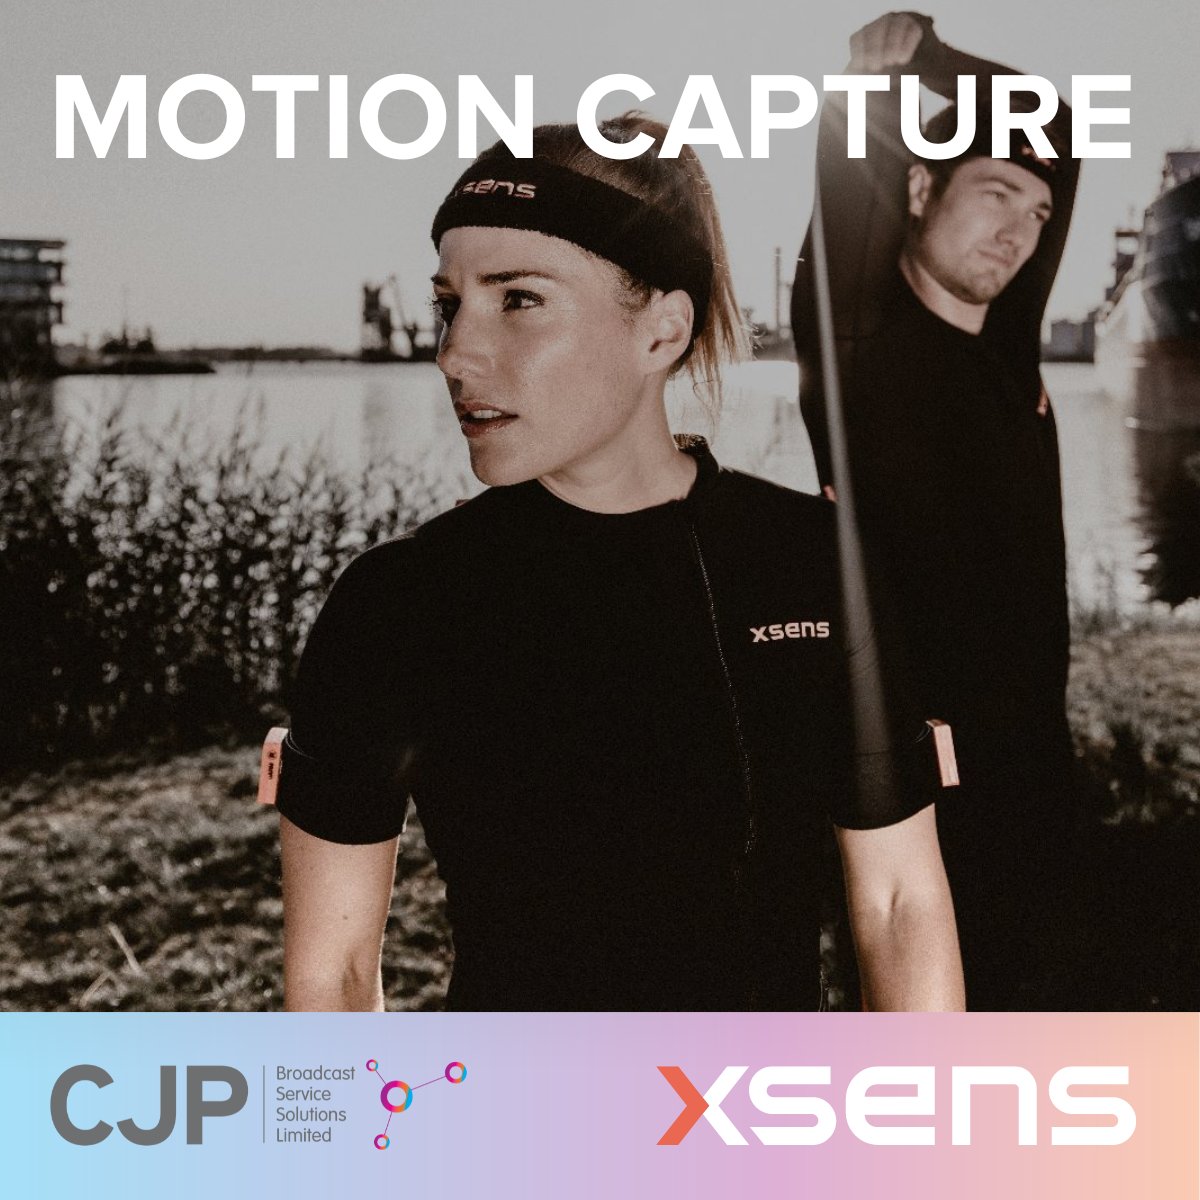 CJP is teaming up with industry-leading #MoCap specialist, #Xsens! Dive into a world of efficient, easy-to-calibrate technology used by top game producers & movie effects houses. Bring nuanced, real-life movements to your #animations. Read more: bit.ly/3oKSChl